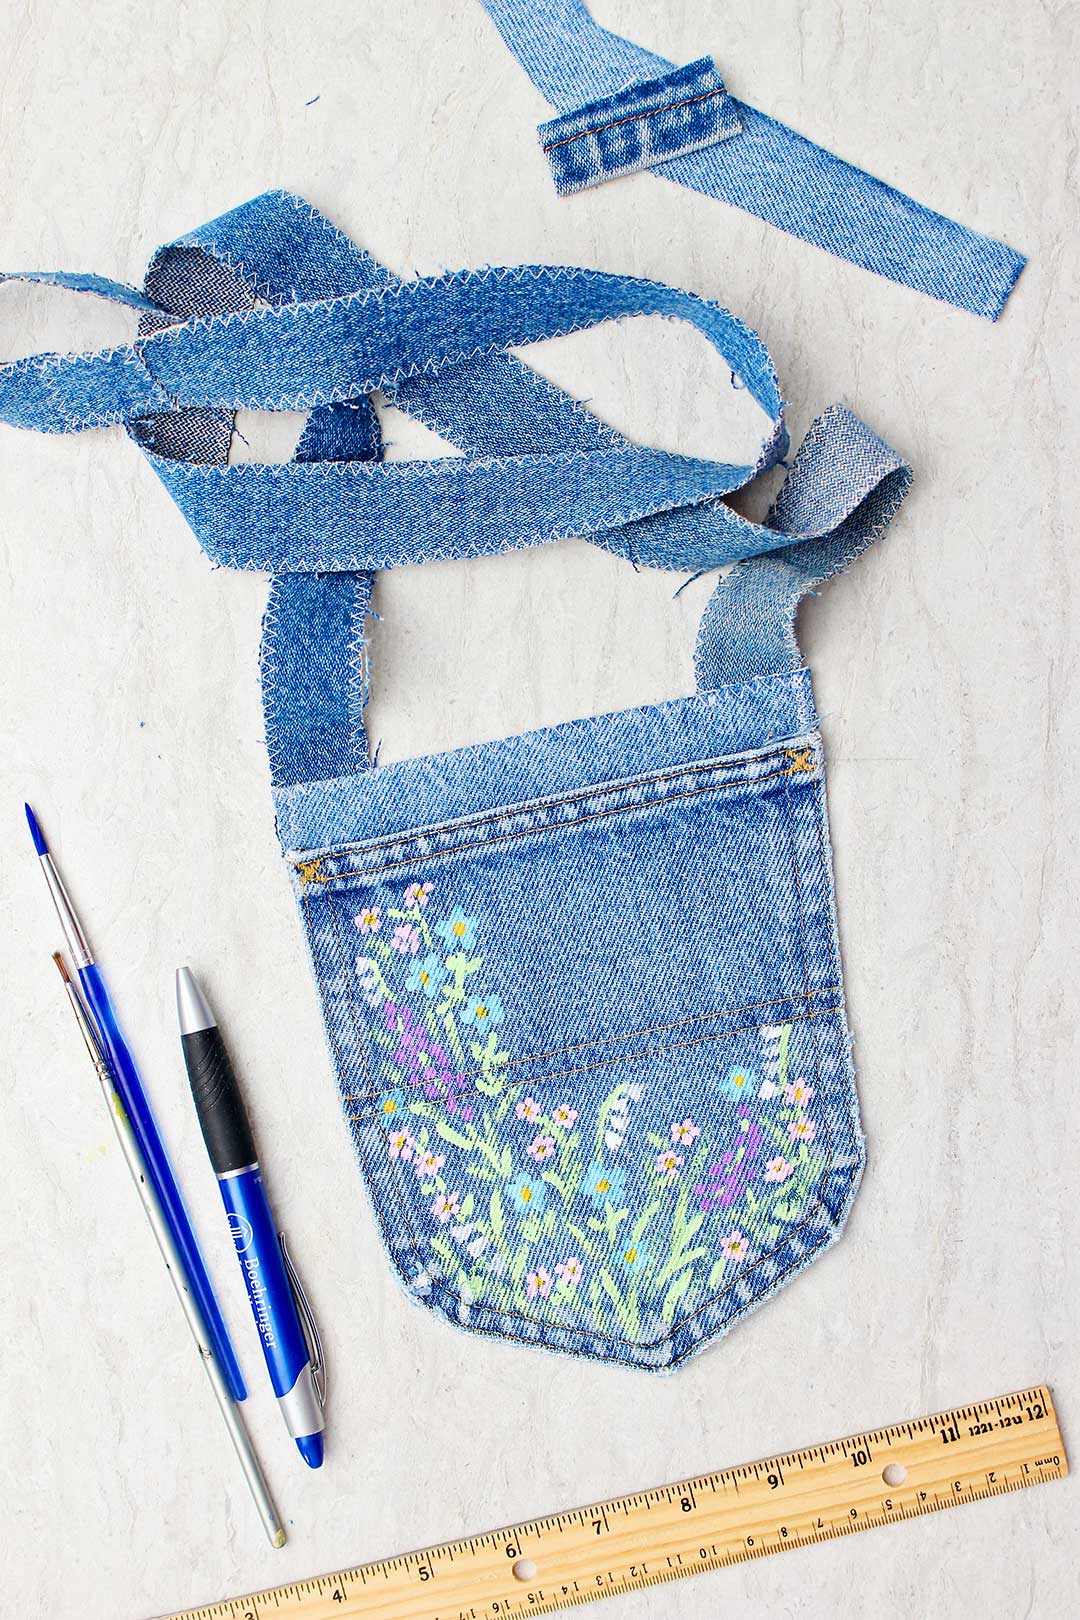 Completed jeans pocket purse.